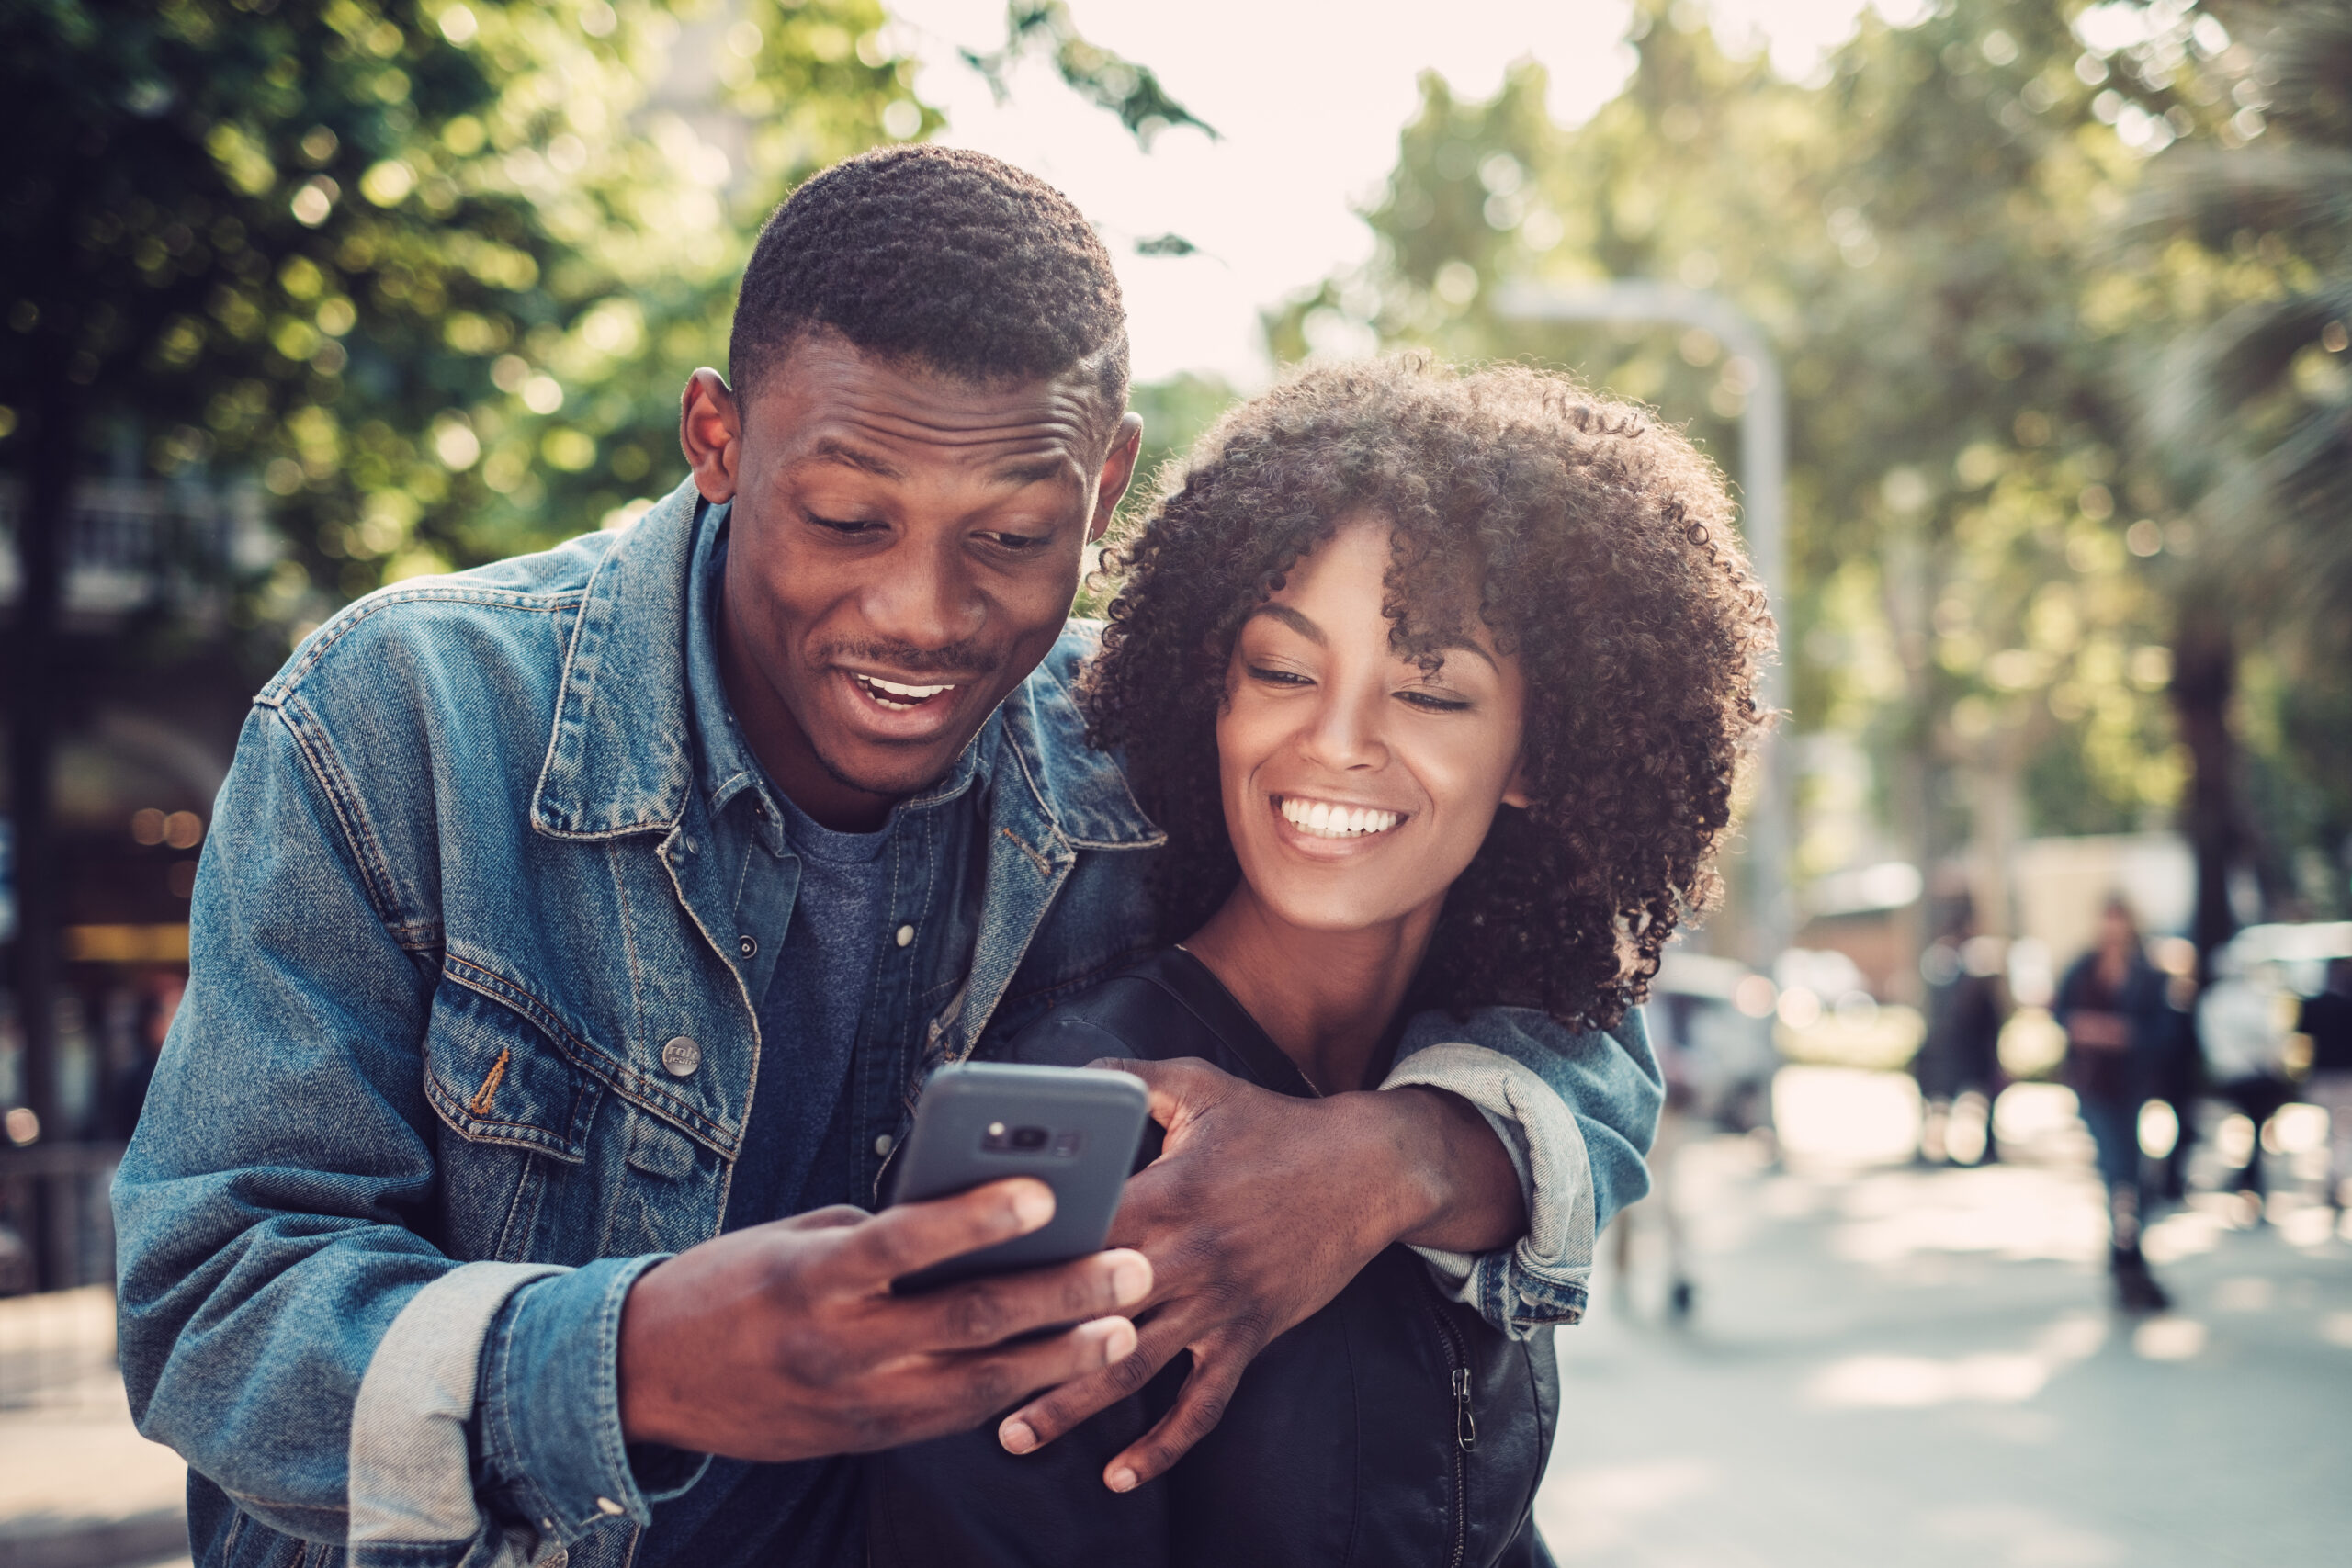 Multicultural Marketing Research for A Top Global Dating-App